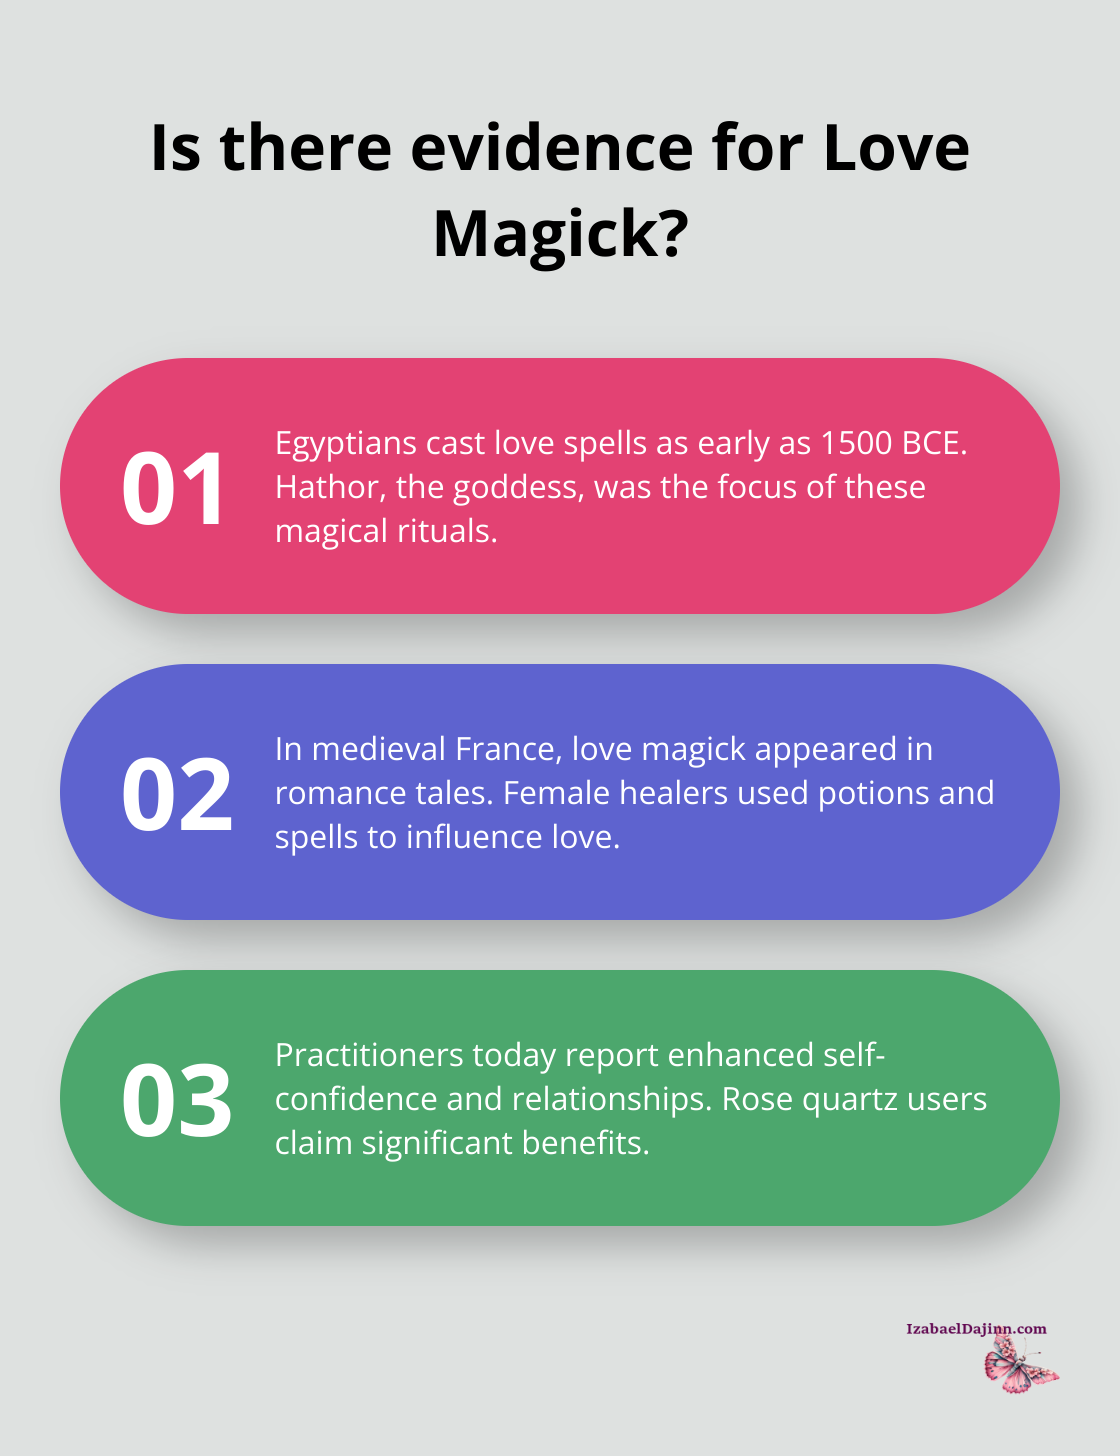 Fact - Is there evidence for Love Magick?